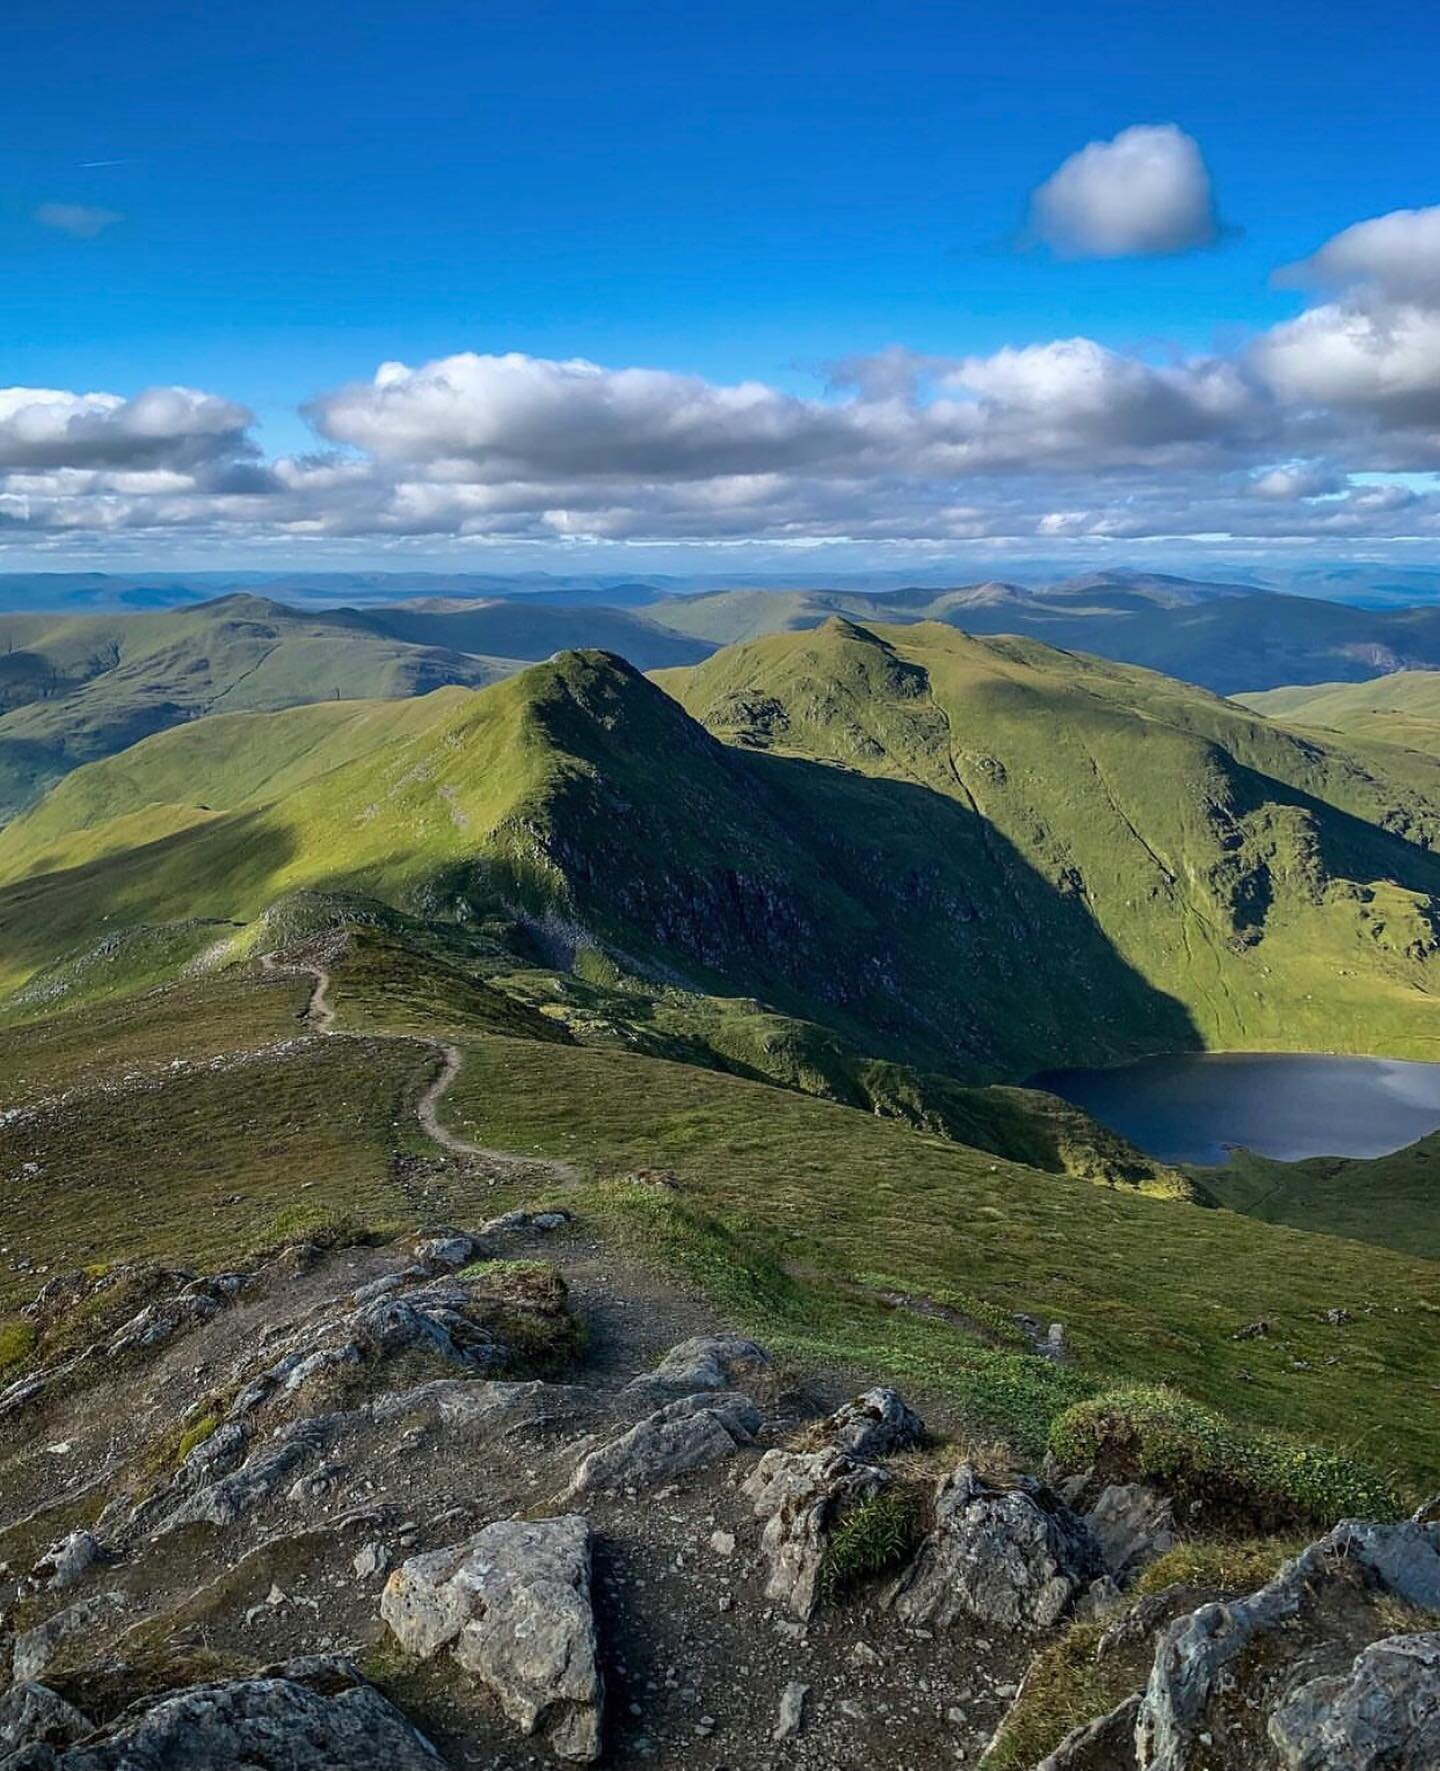 To the north of Loch Tay is a range of seven Munros, the &lsquo;Ben Lawers Group&rsquo;. This eight mile ridge includes Beinn Ghlas, Meall Garbh, Meall Corranaich, An St&ugrave;c, Meall Greigh and Meall a' Choire Leith, centred around its highest pea